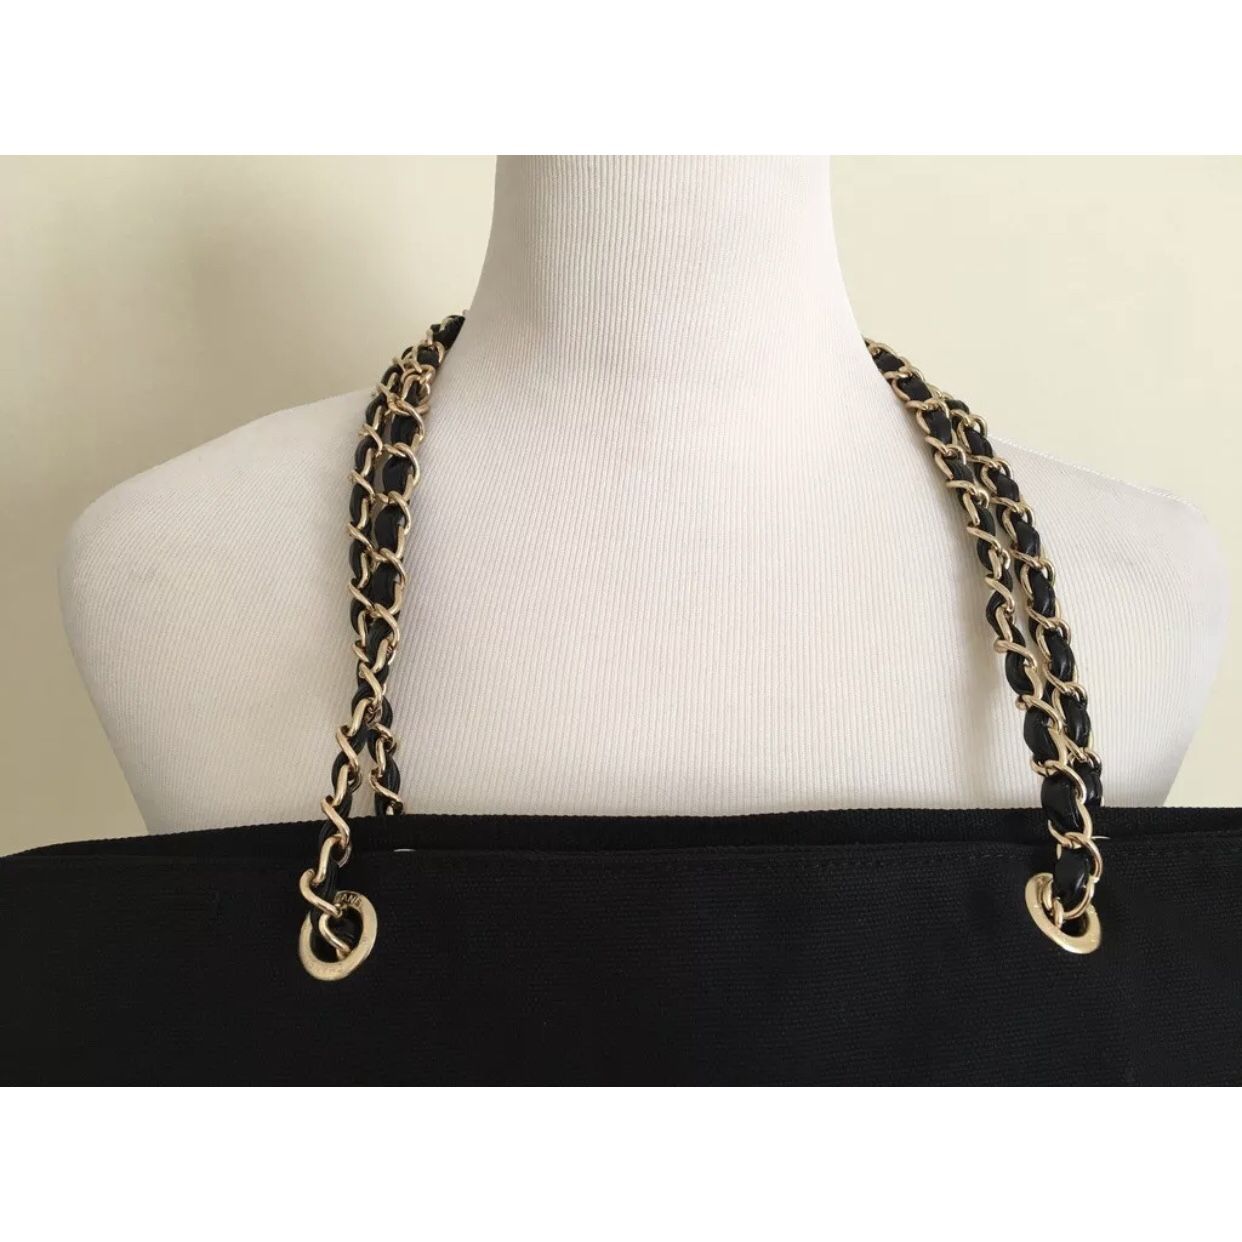 ULTRA RARE CHANEL CC 2016 RUNWAY CHAIN PEARL BAG LIMITED EDITION VIP GIFT  for Sale in Mesa, AZ - OfferUp